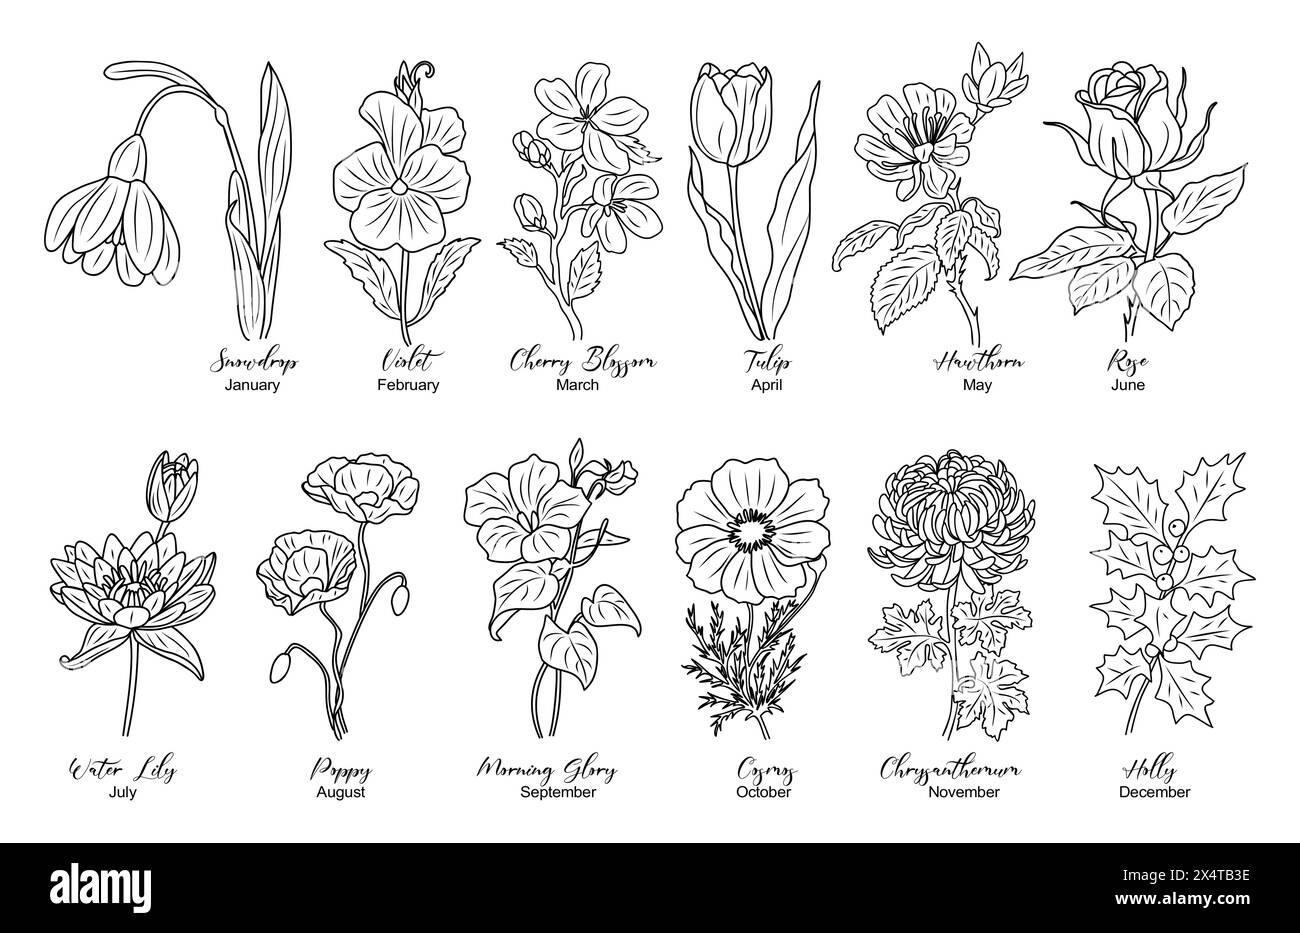 Set of Birth month flowers line art vector illustrations. Snowdrop, Violet, Cherry Blossom, Water lily, poppy, morning glory, cosmos, chrysanthemum, r Stock Vector